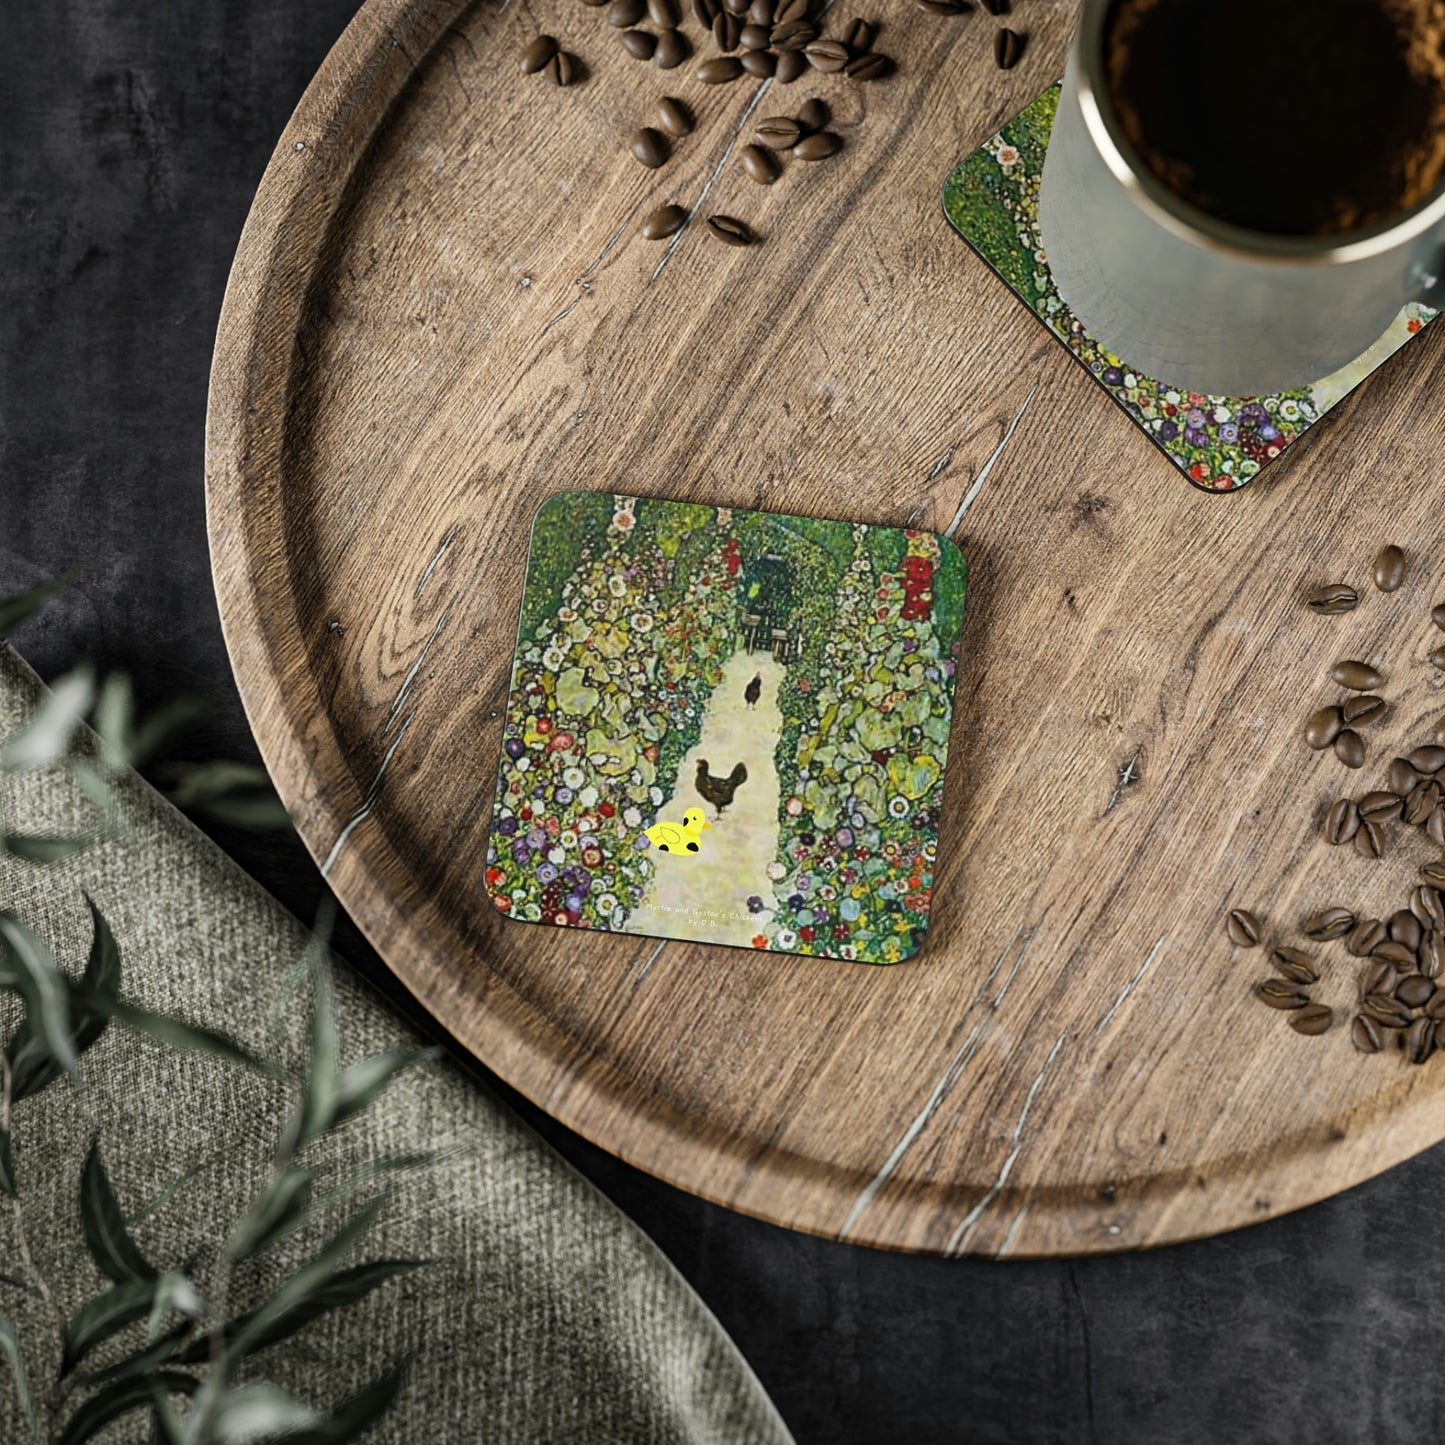 Myrtle and Gustav's Chickens by D.B. printed on stylish Drink Coasters